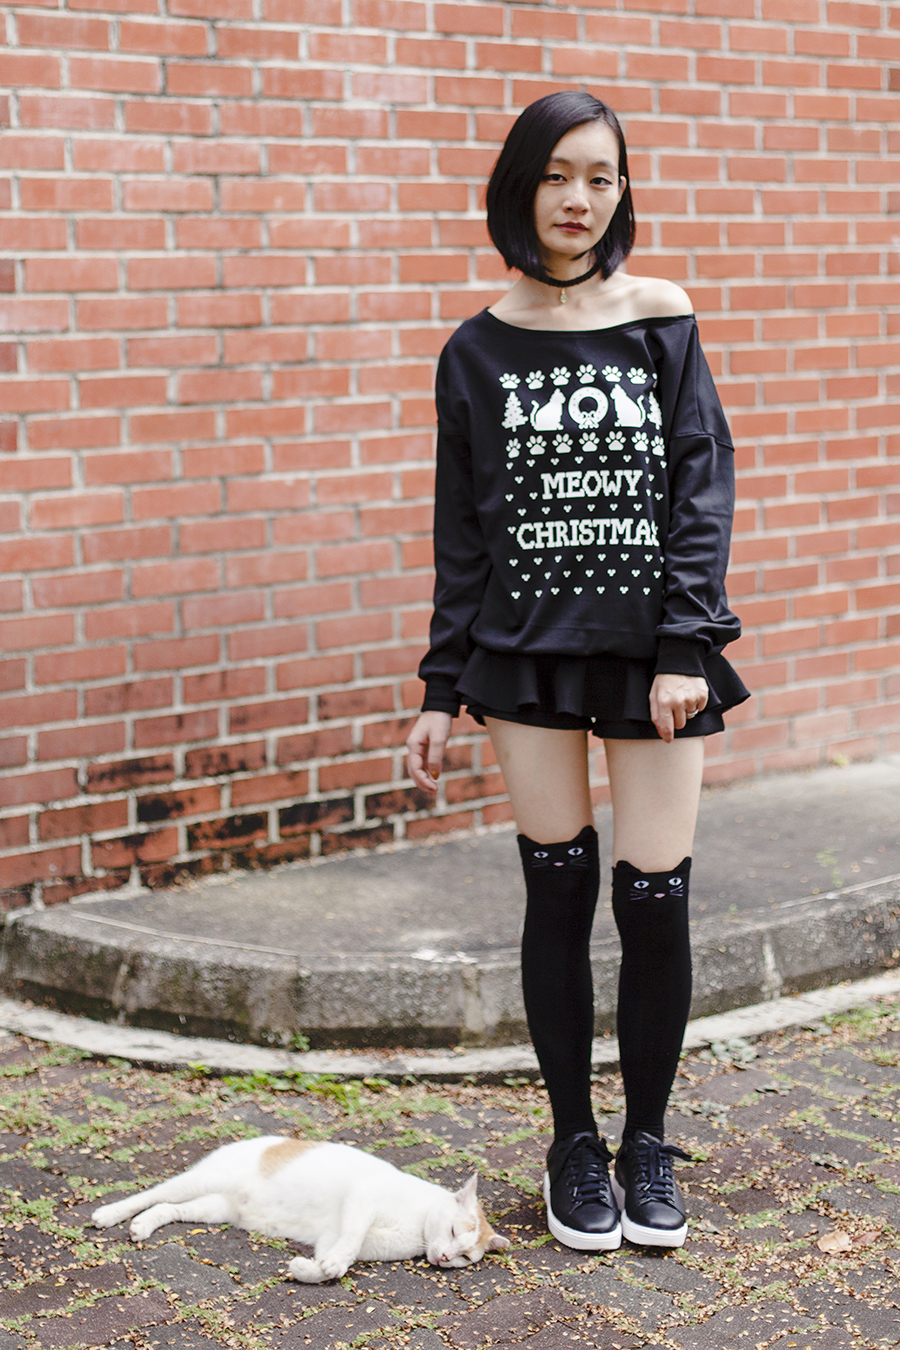 Meowy Christmas outfit: Black knee high cat socks, Dresslily Meowy Christmas sweater, Dresslily christmas tree lace choker necklace, Mango black leather sneakers.